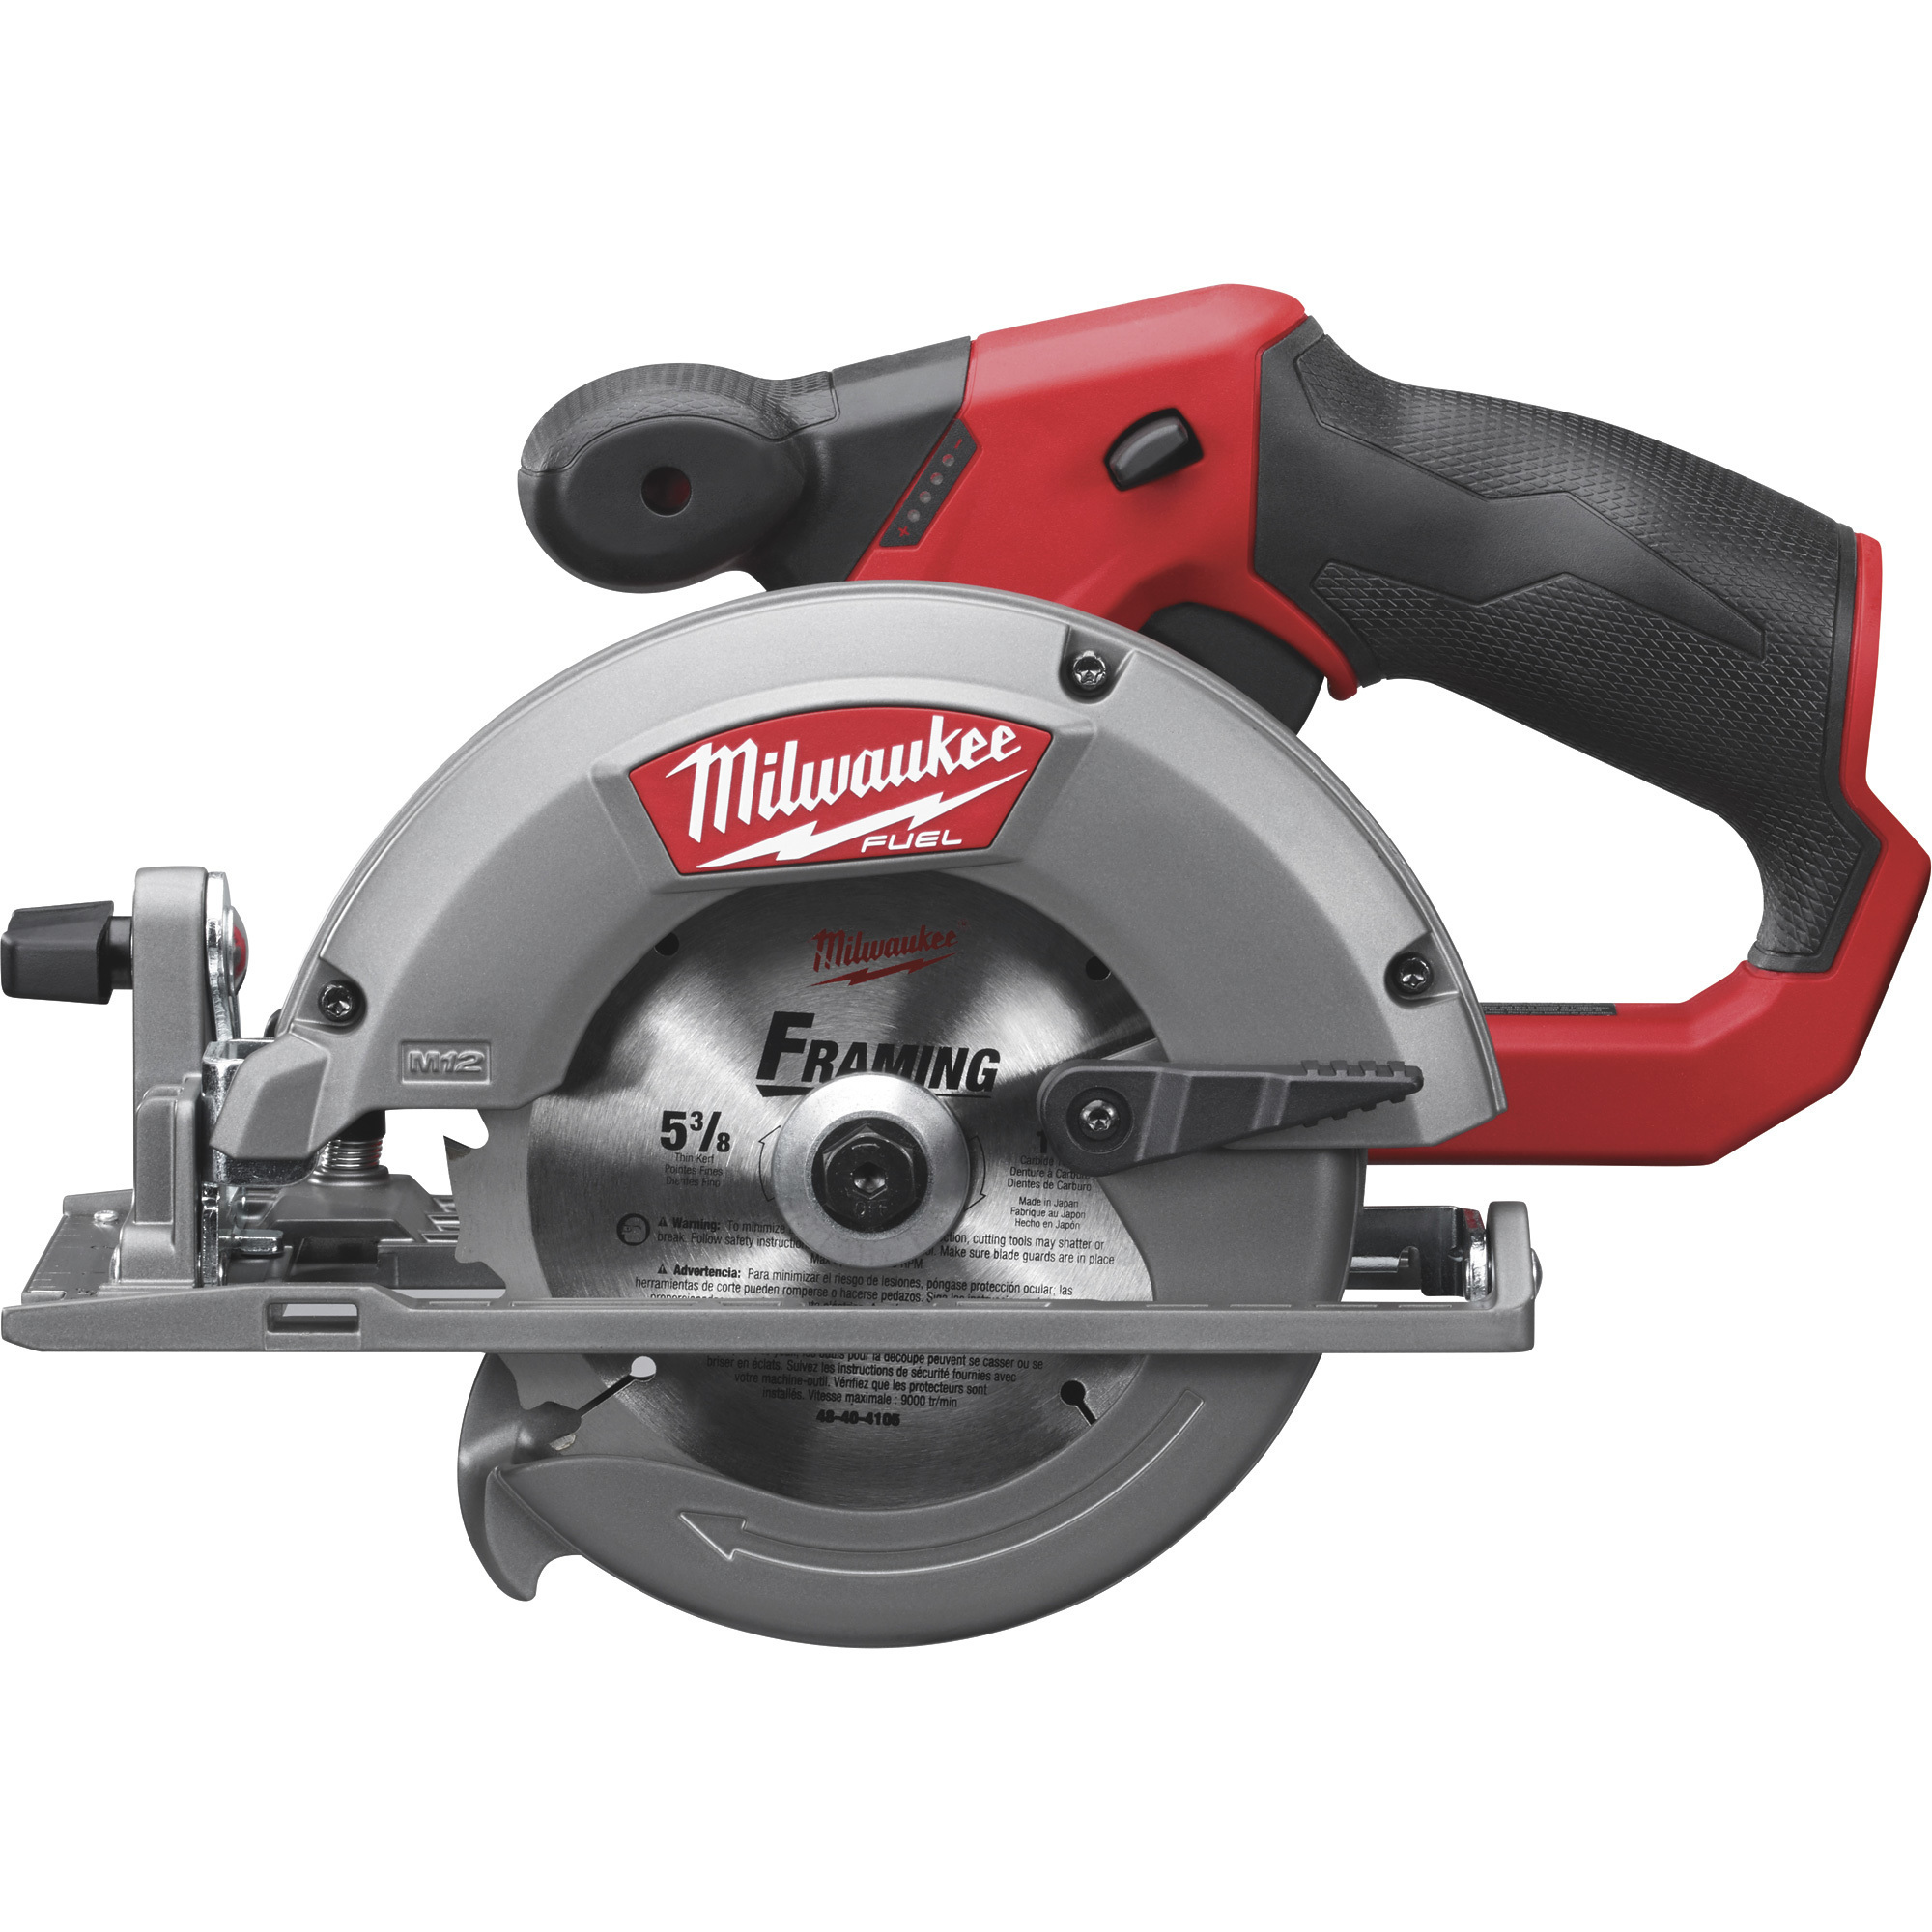 Milwaukee M12 FUEL Circular Saw, Tool Only, 5 3/8Inch, Model 2530-20